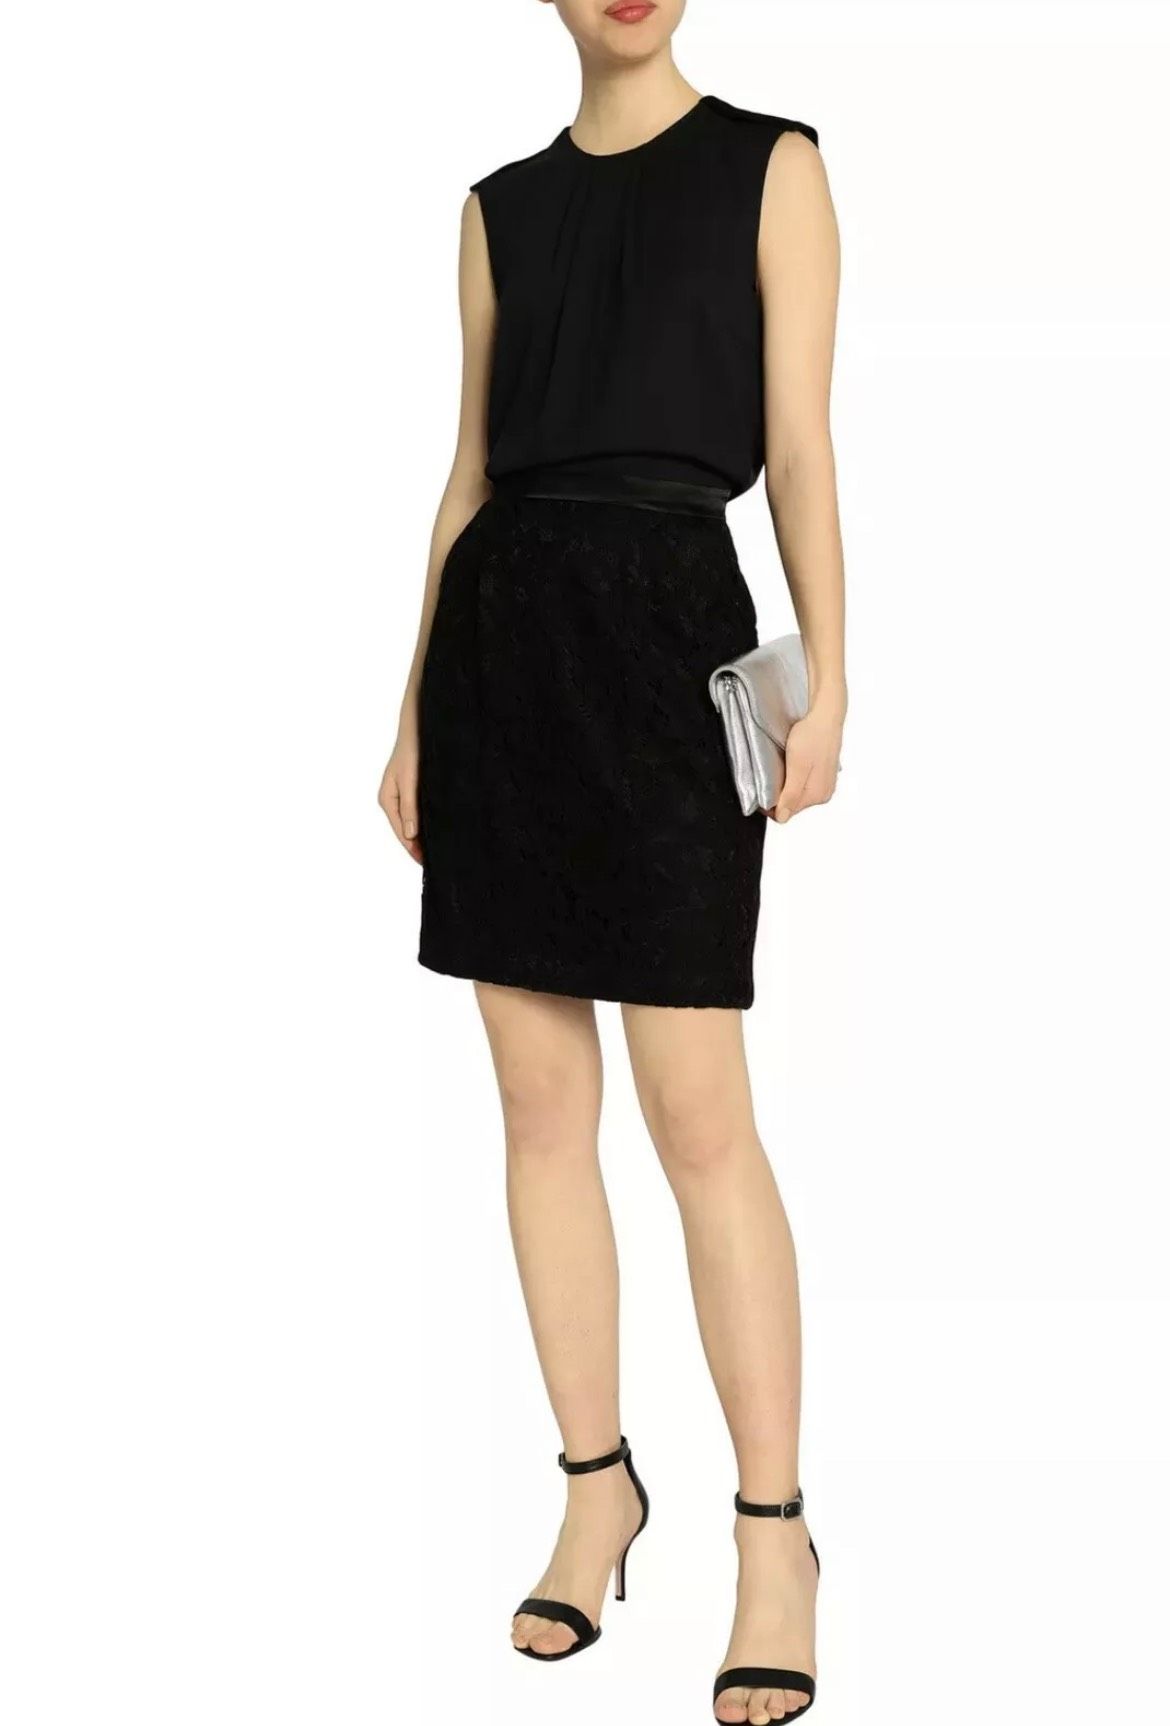 Malene Birger Size 4 Lace Black Cocktail Dress on Queenly